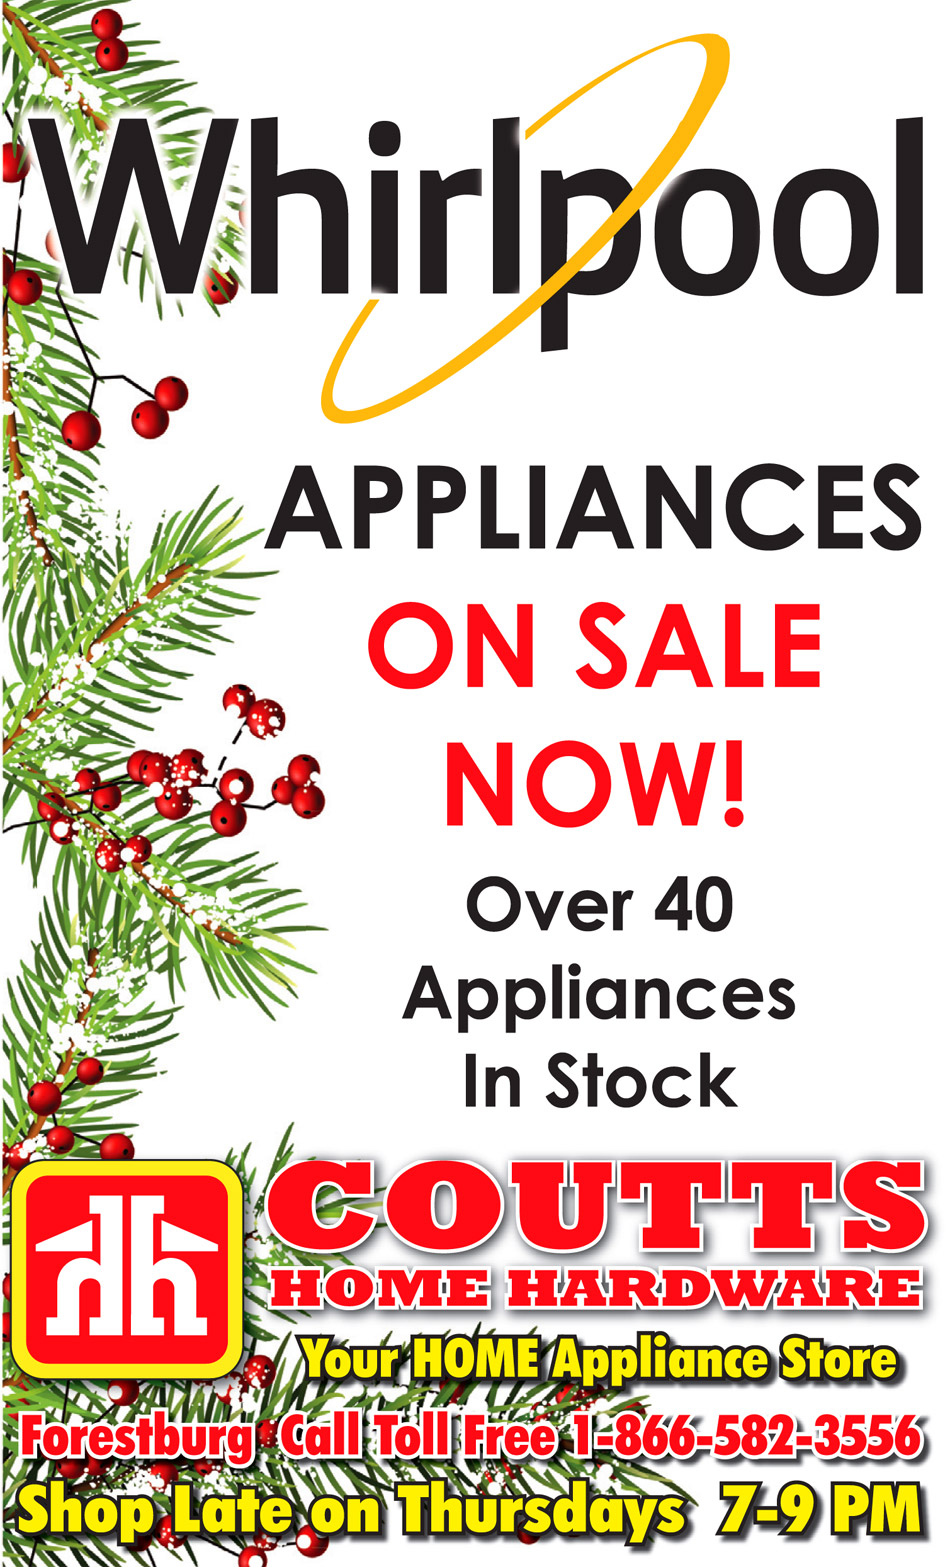 Coutts Home Hardware Forestburg Hardware Whirlpool Appliances on Sale